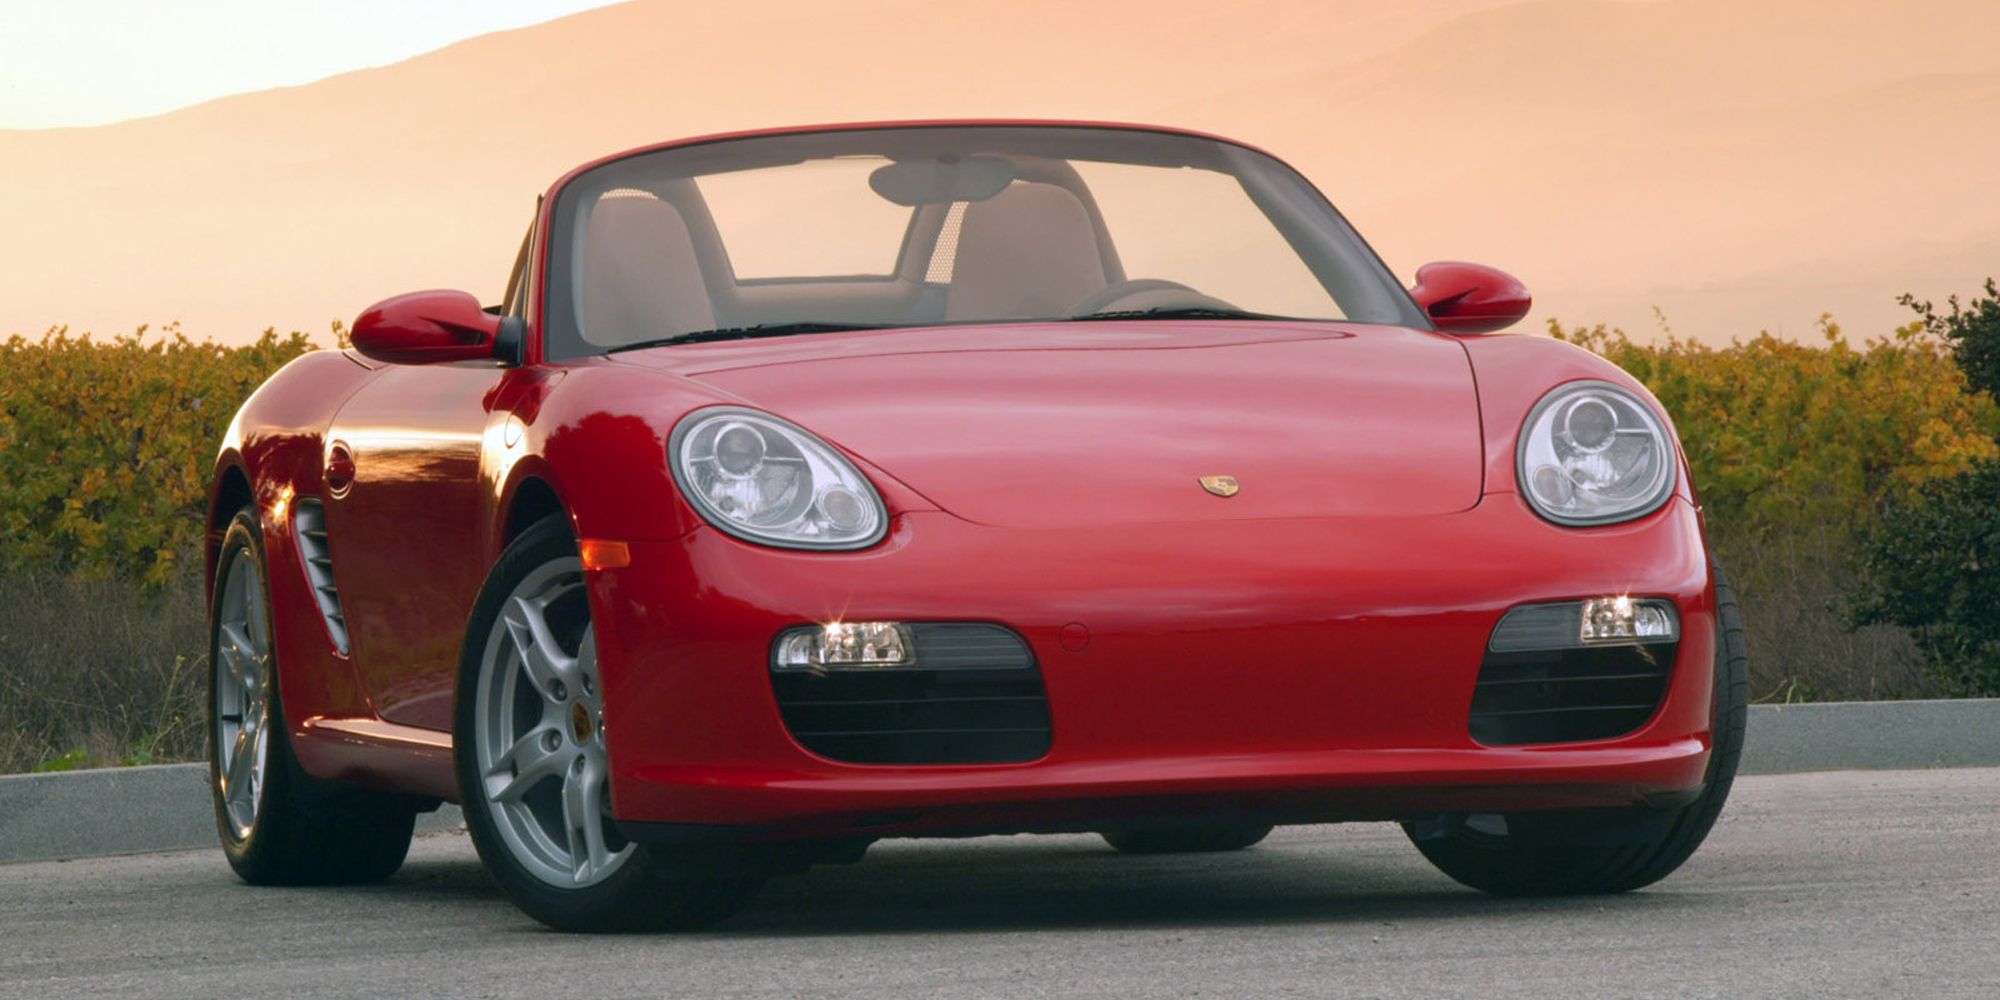 The front of a red 987 Boxster